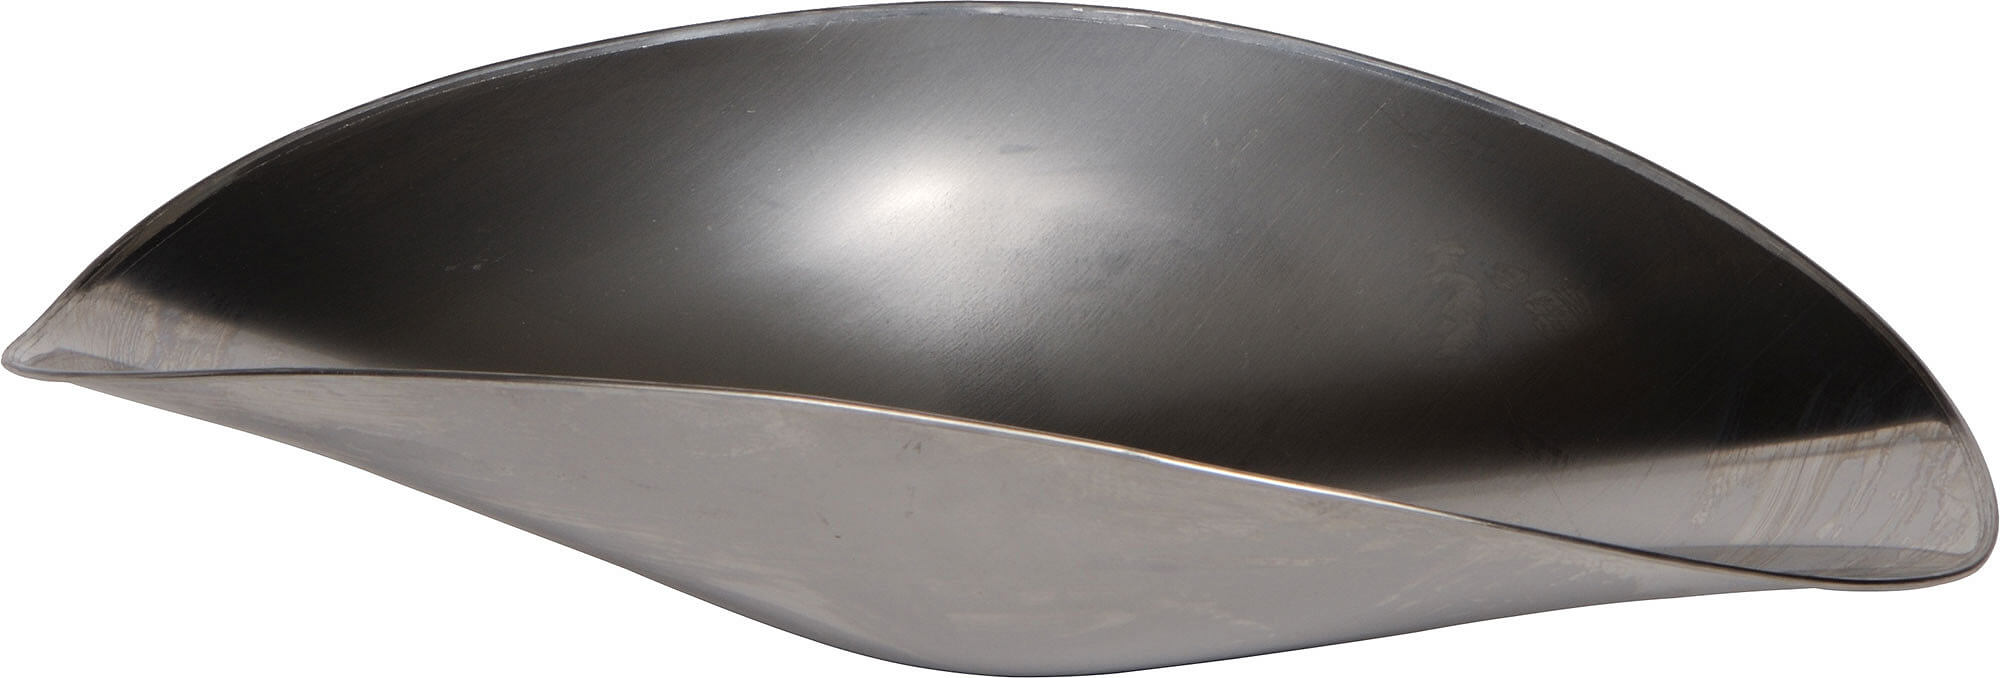 Penn Scale Stainless steel scoops- Made in USA scales